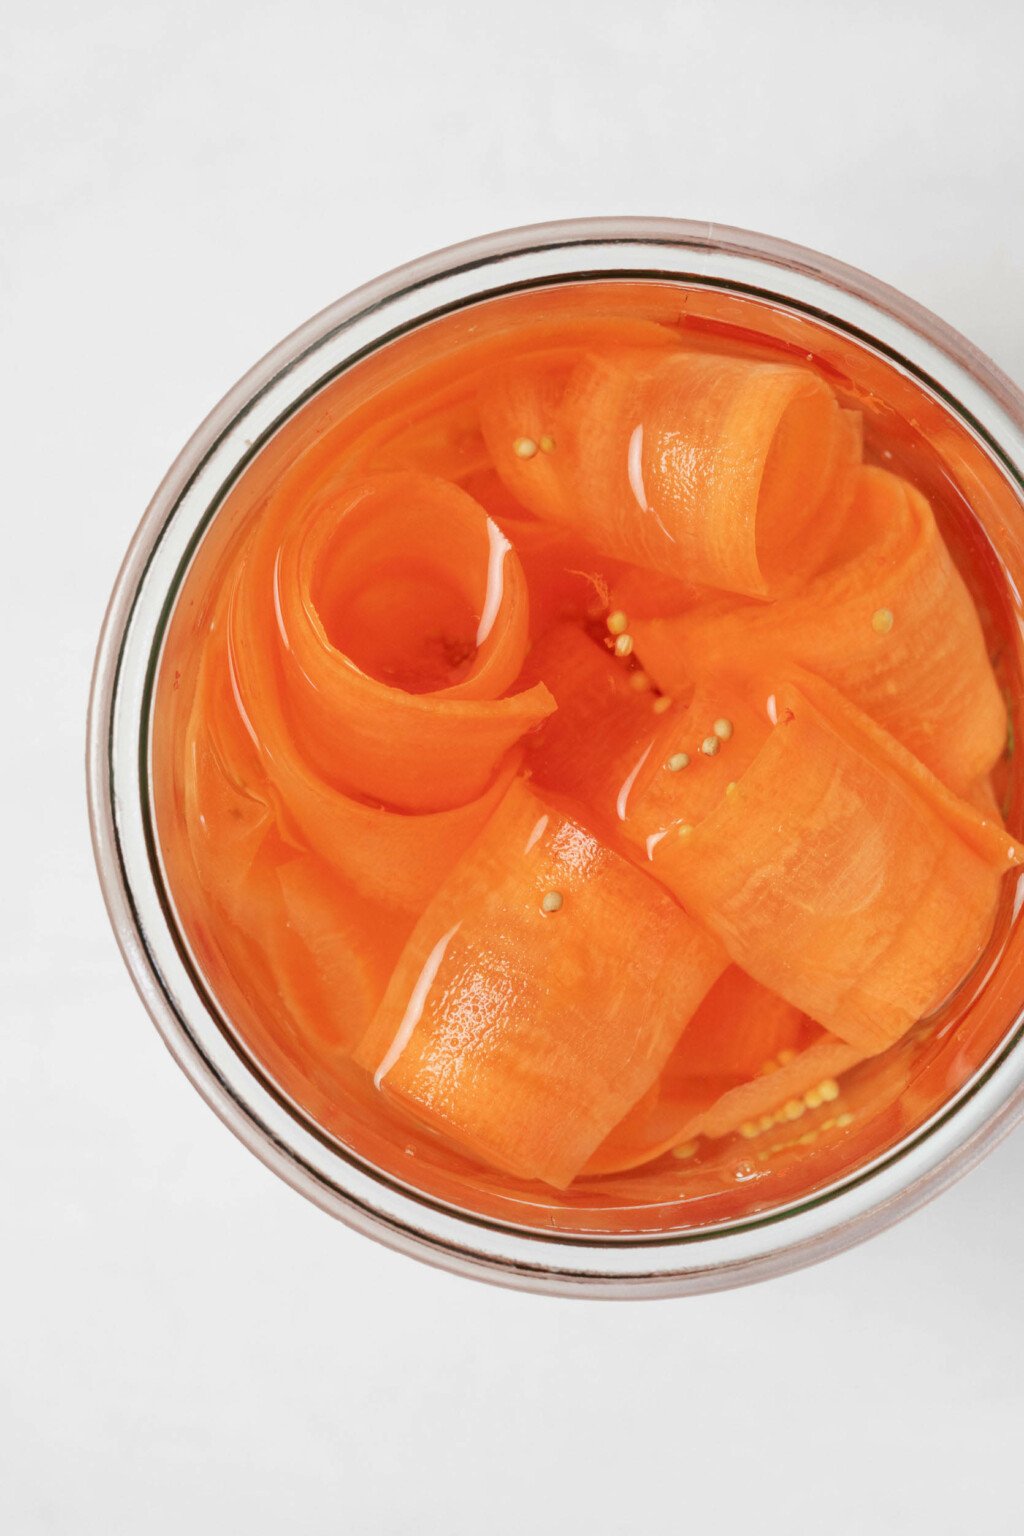 An overhead image of a jar filled with pickled carrot ribbons.